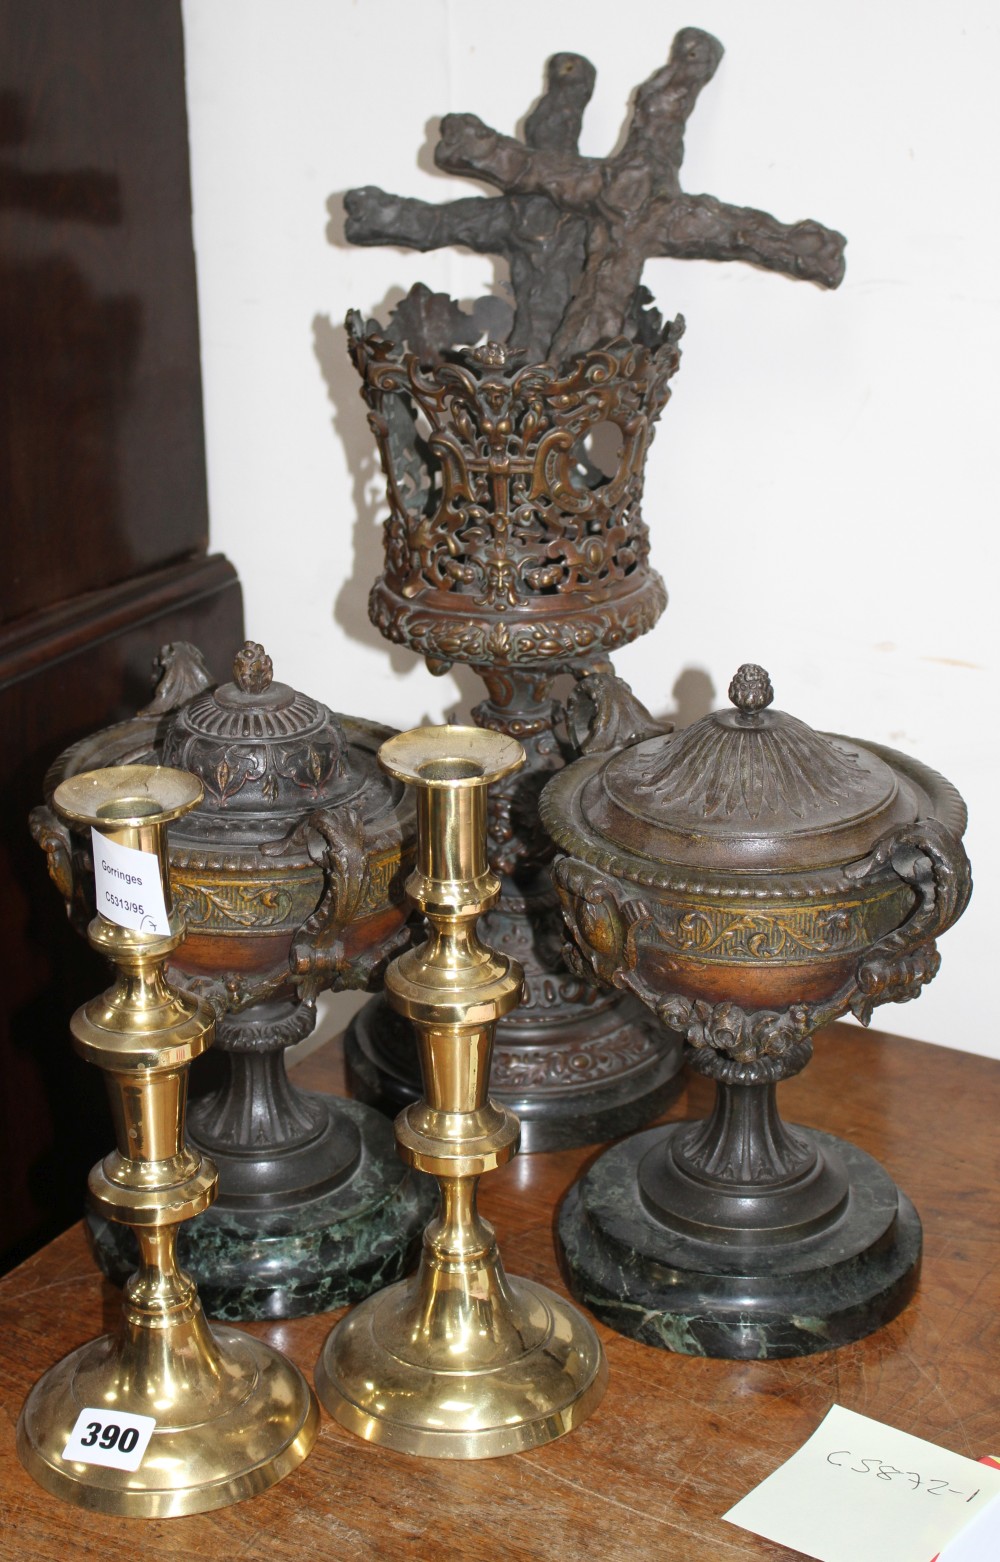 A pair of late Victorian cast iron two handled urns, one with odd lid, an oil lamp base, a pair of cast iron crosses and a pair of bras